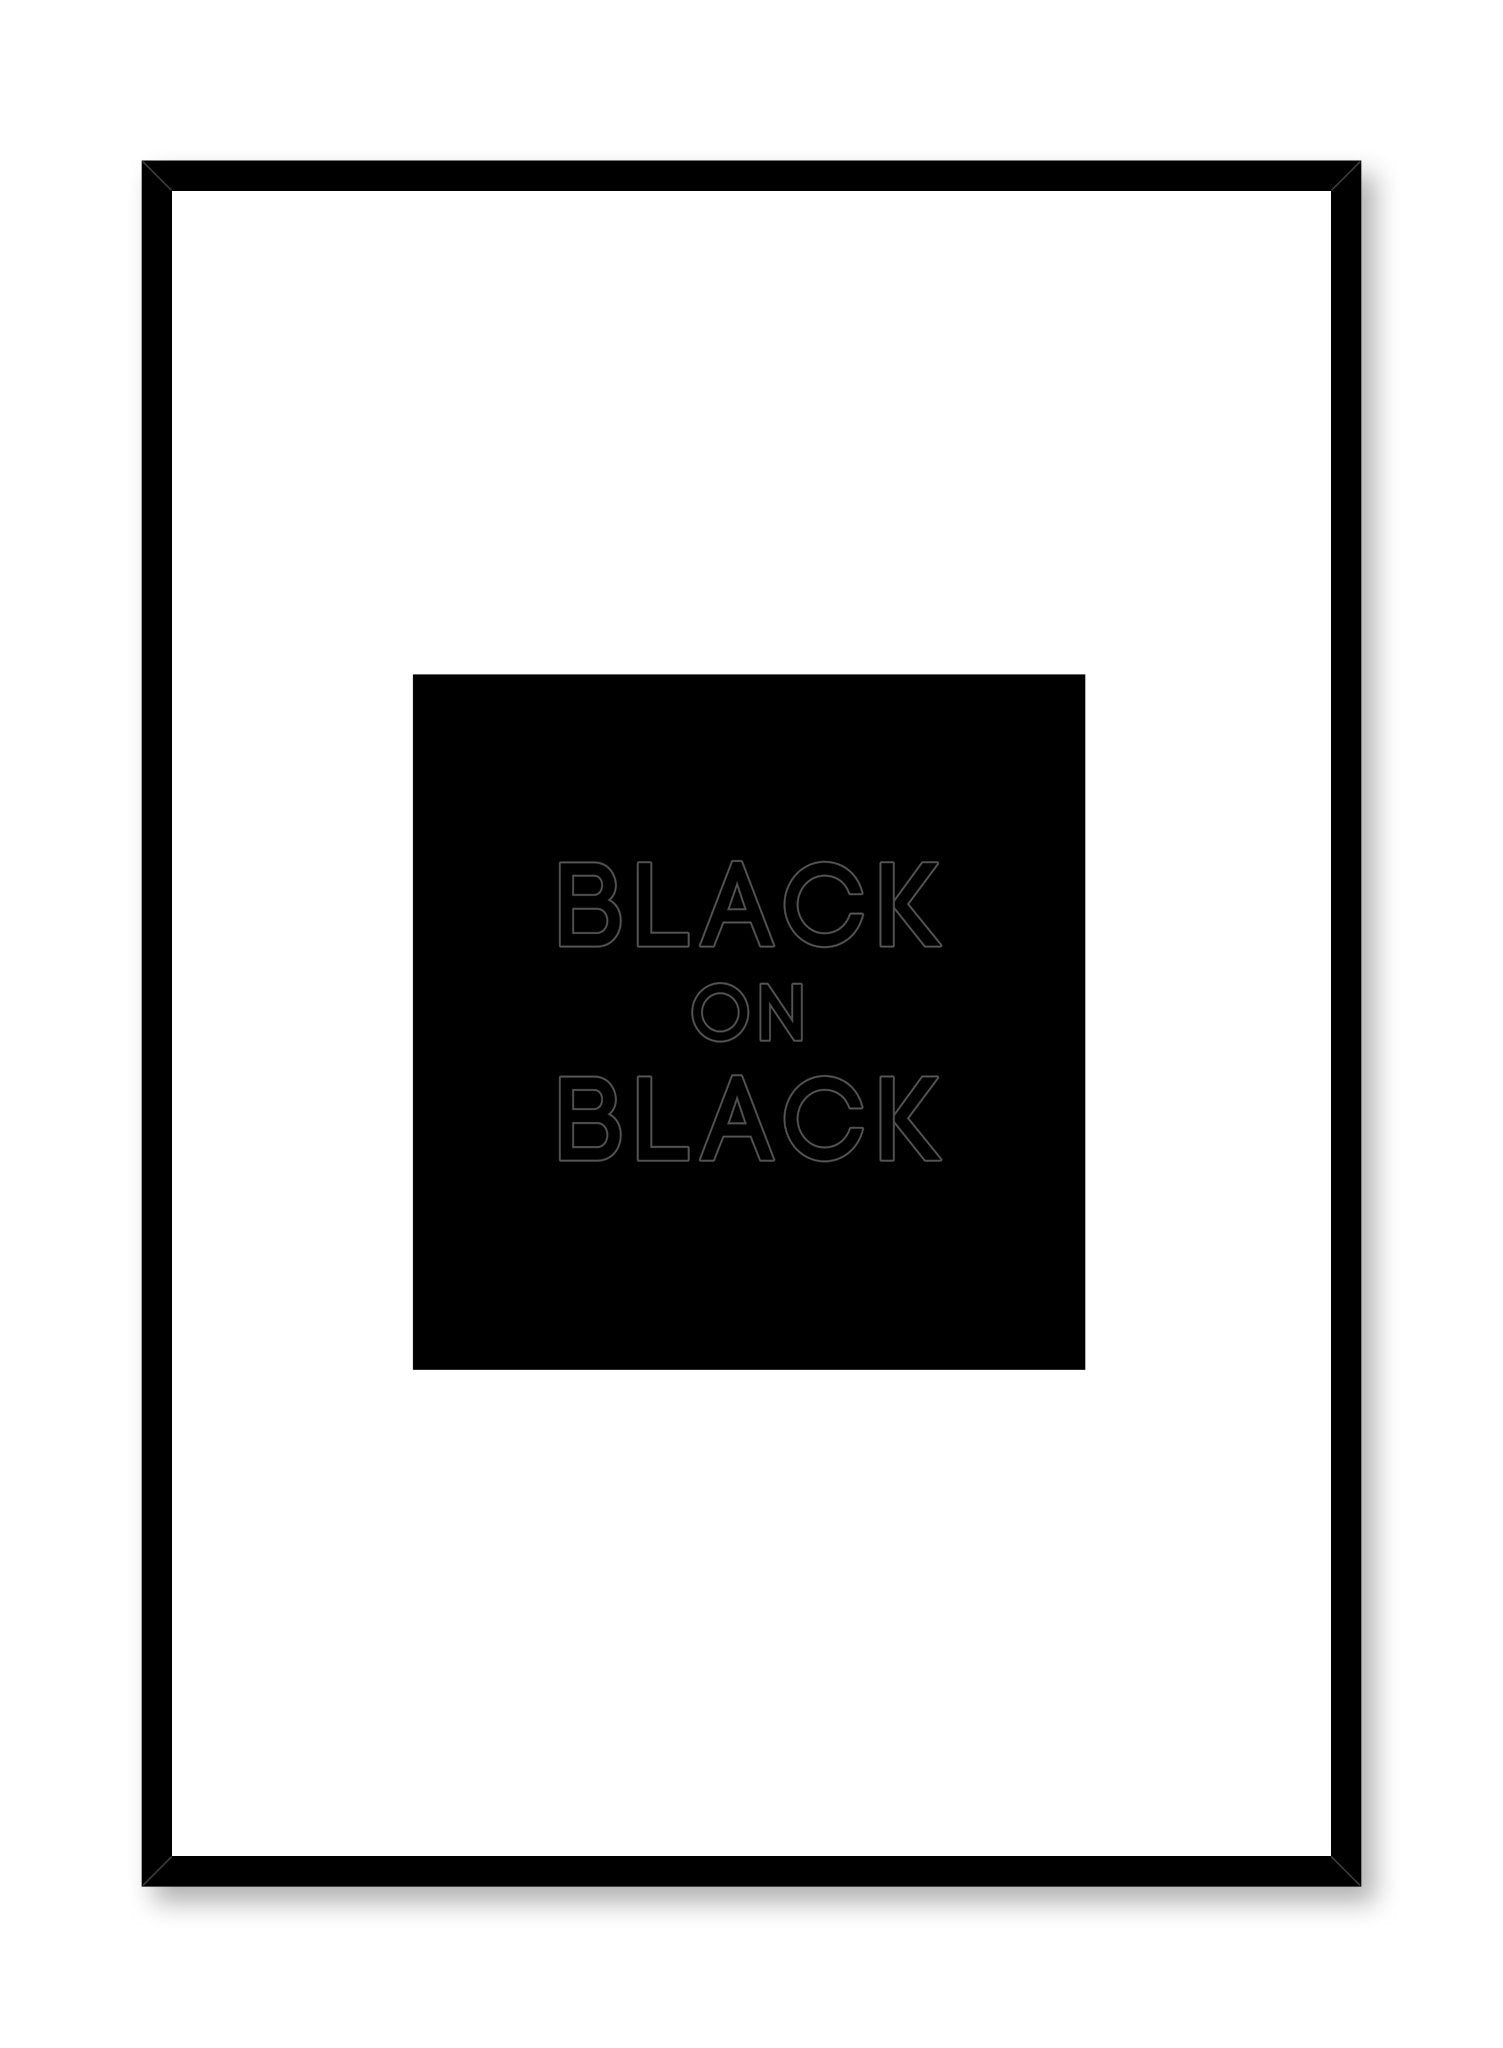 Modern minimalist black and white typography by Opposite Wall with Black on Black quote